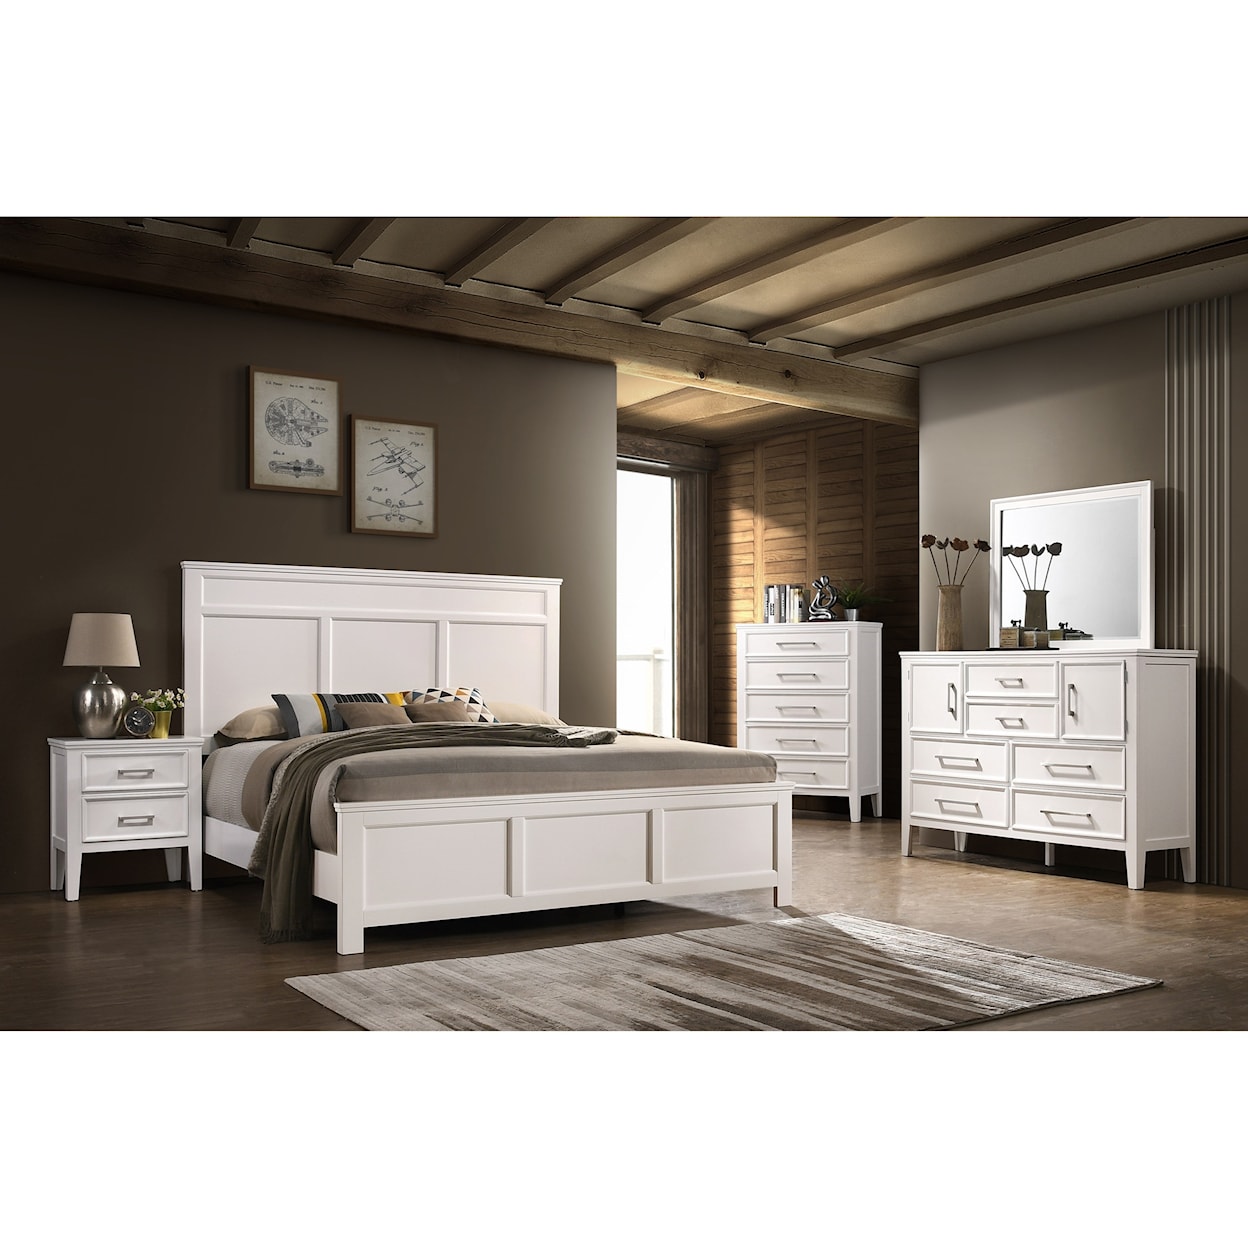 New Classic Andover Full Bedroom Group